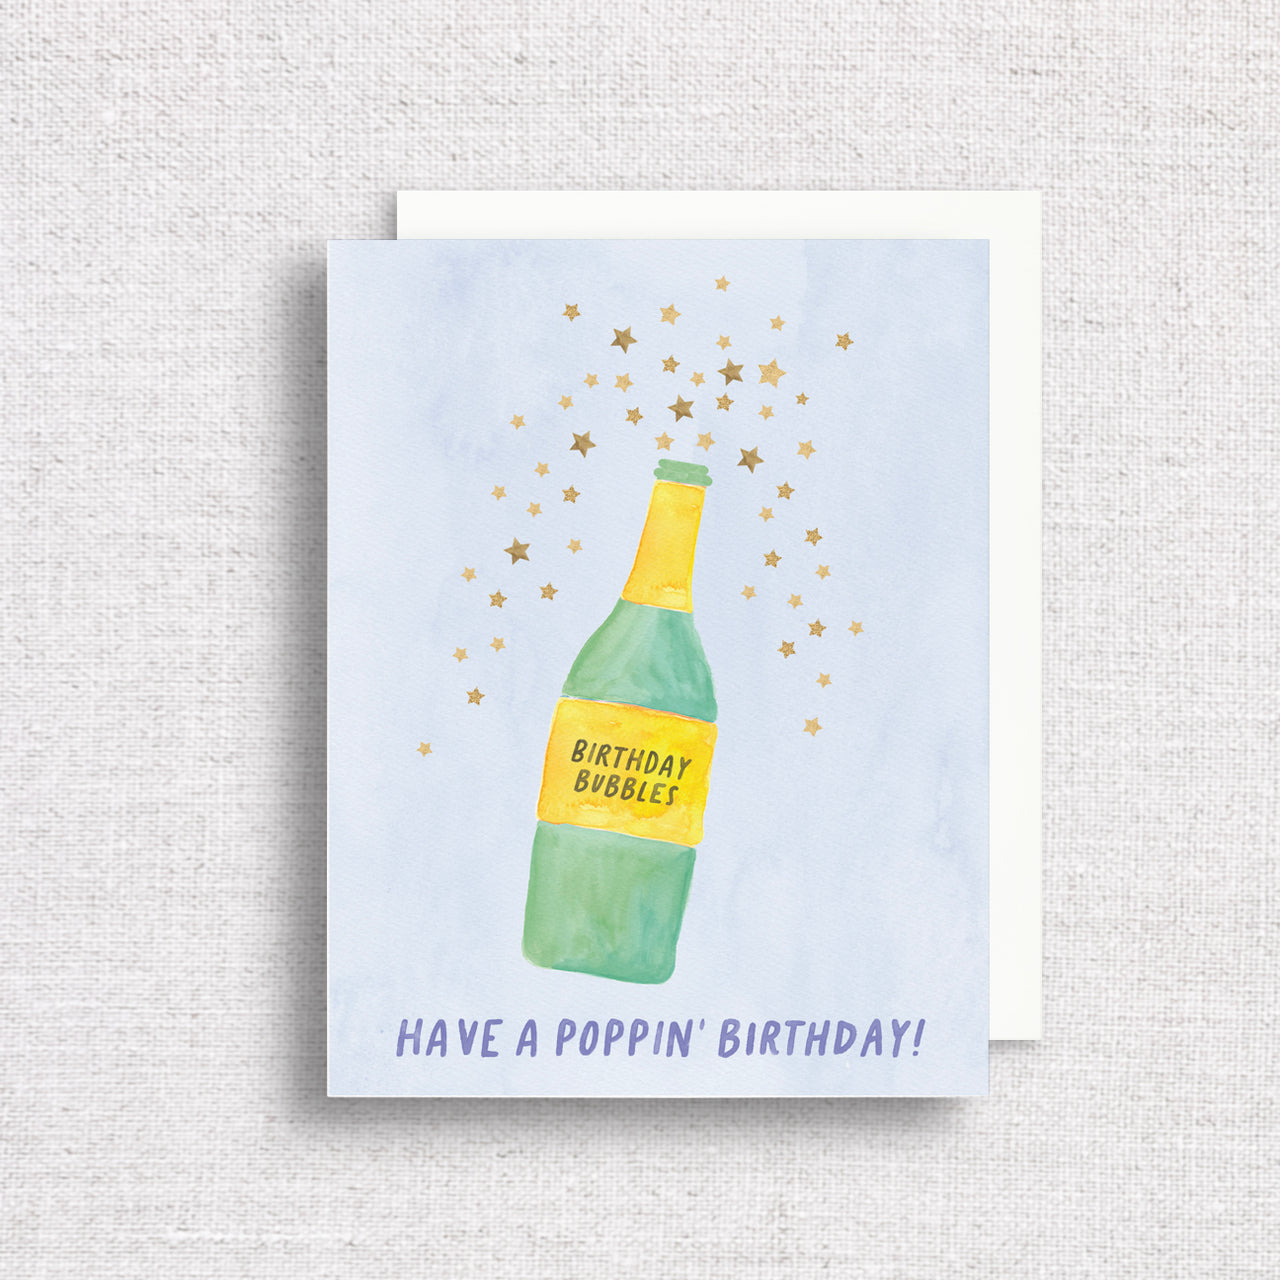 Birthday Bubbles Greeting Card by Gert & Co